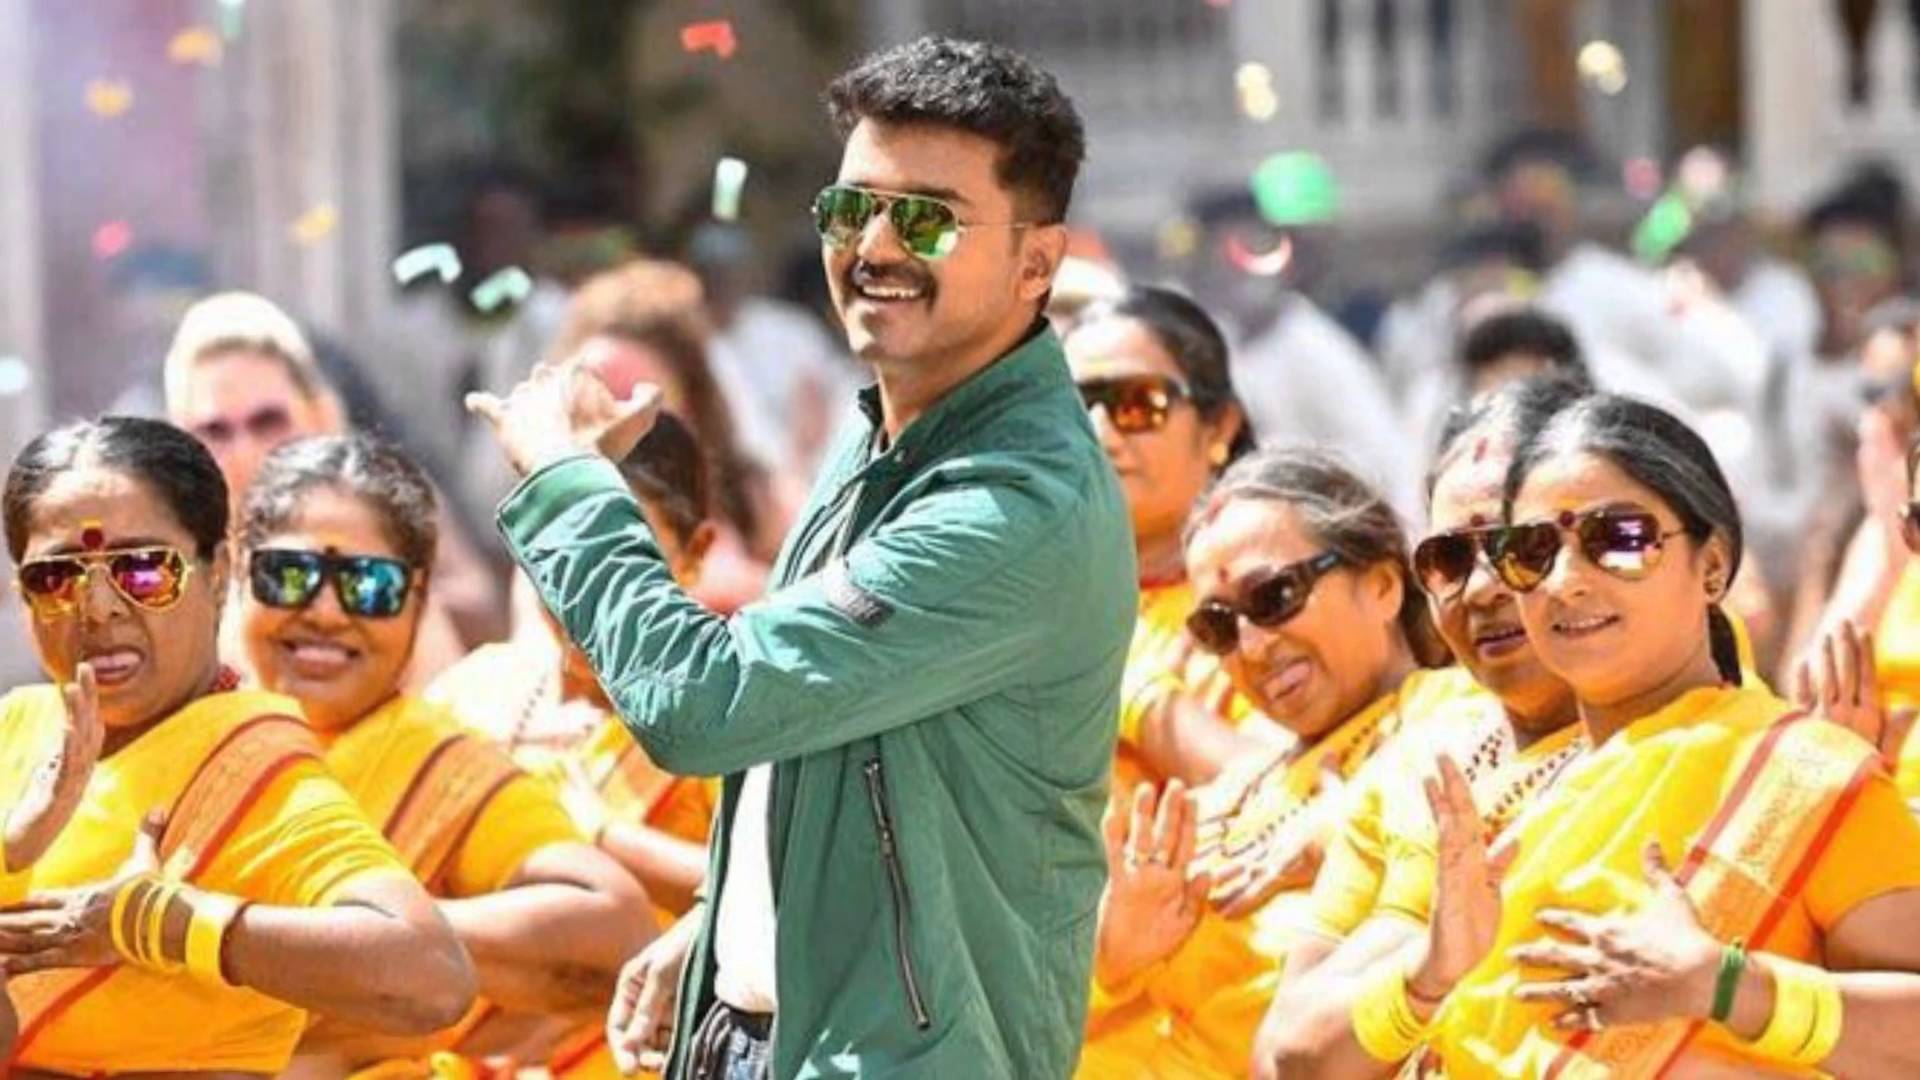 Theri movie review: Vijay's limitations as an actor exposed in a